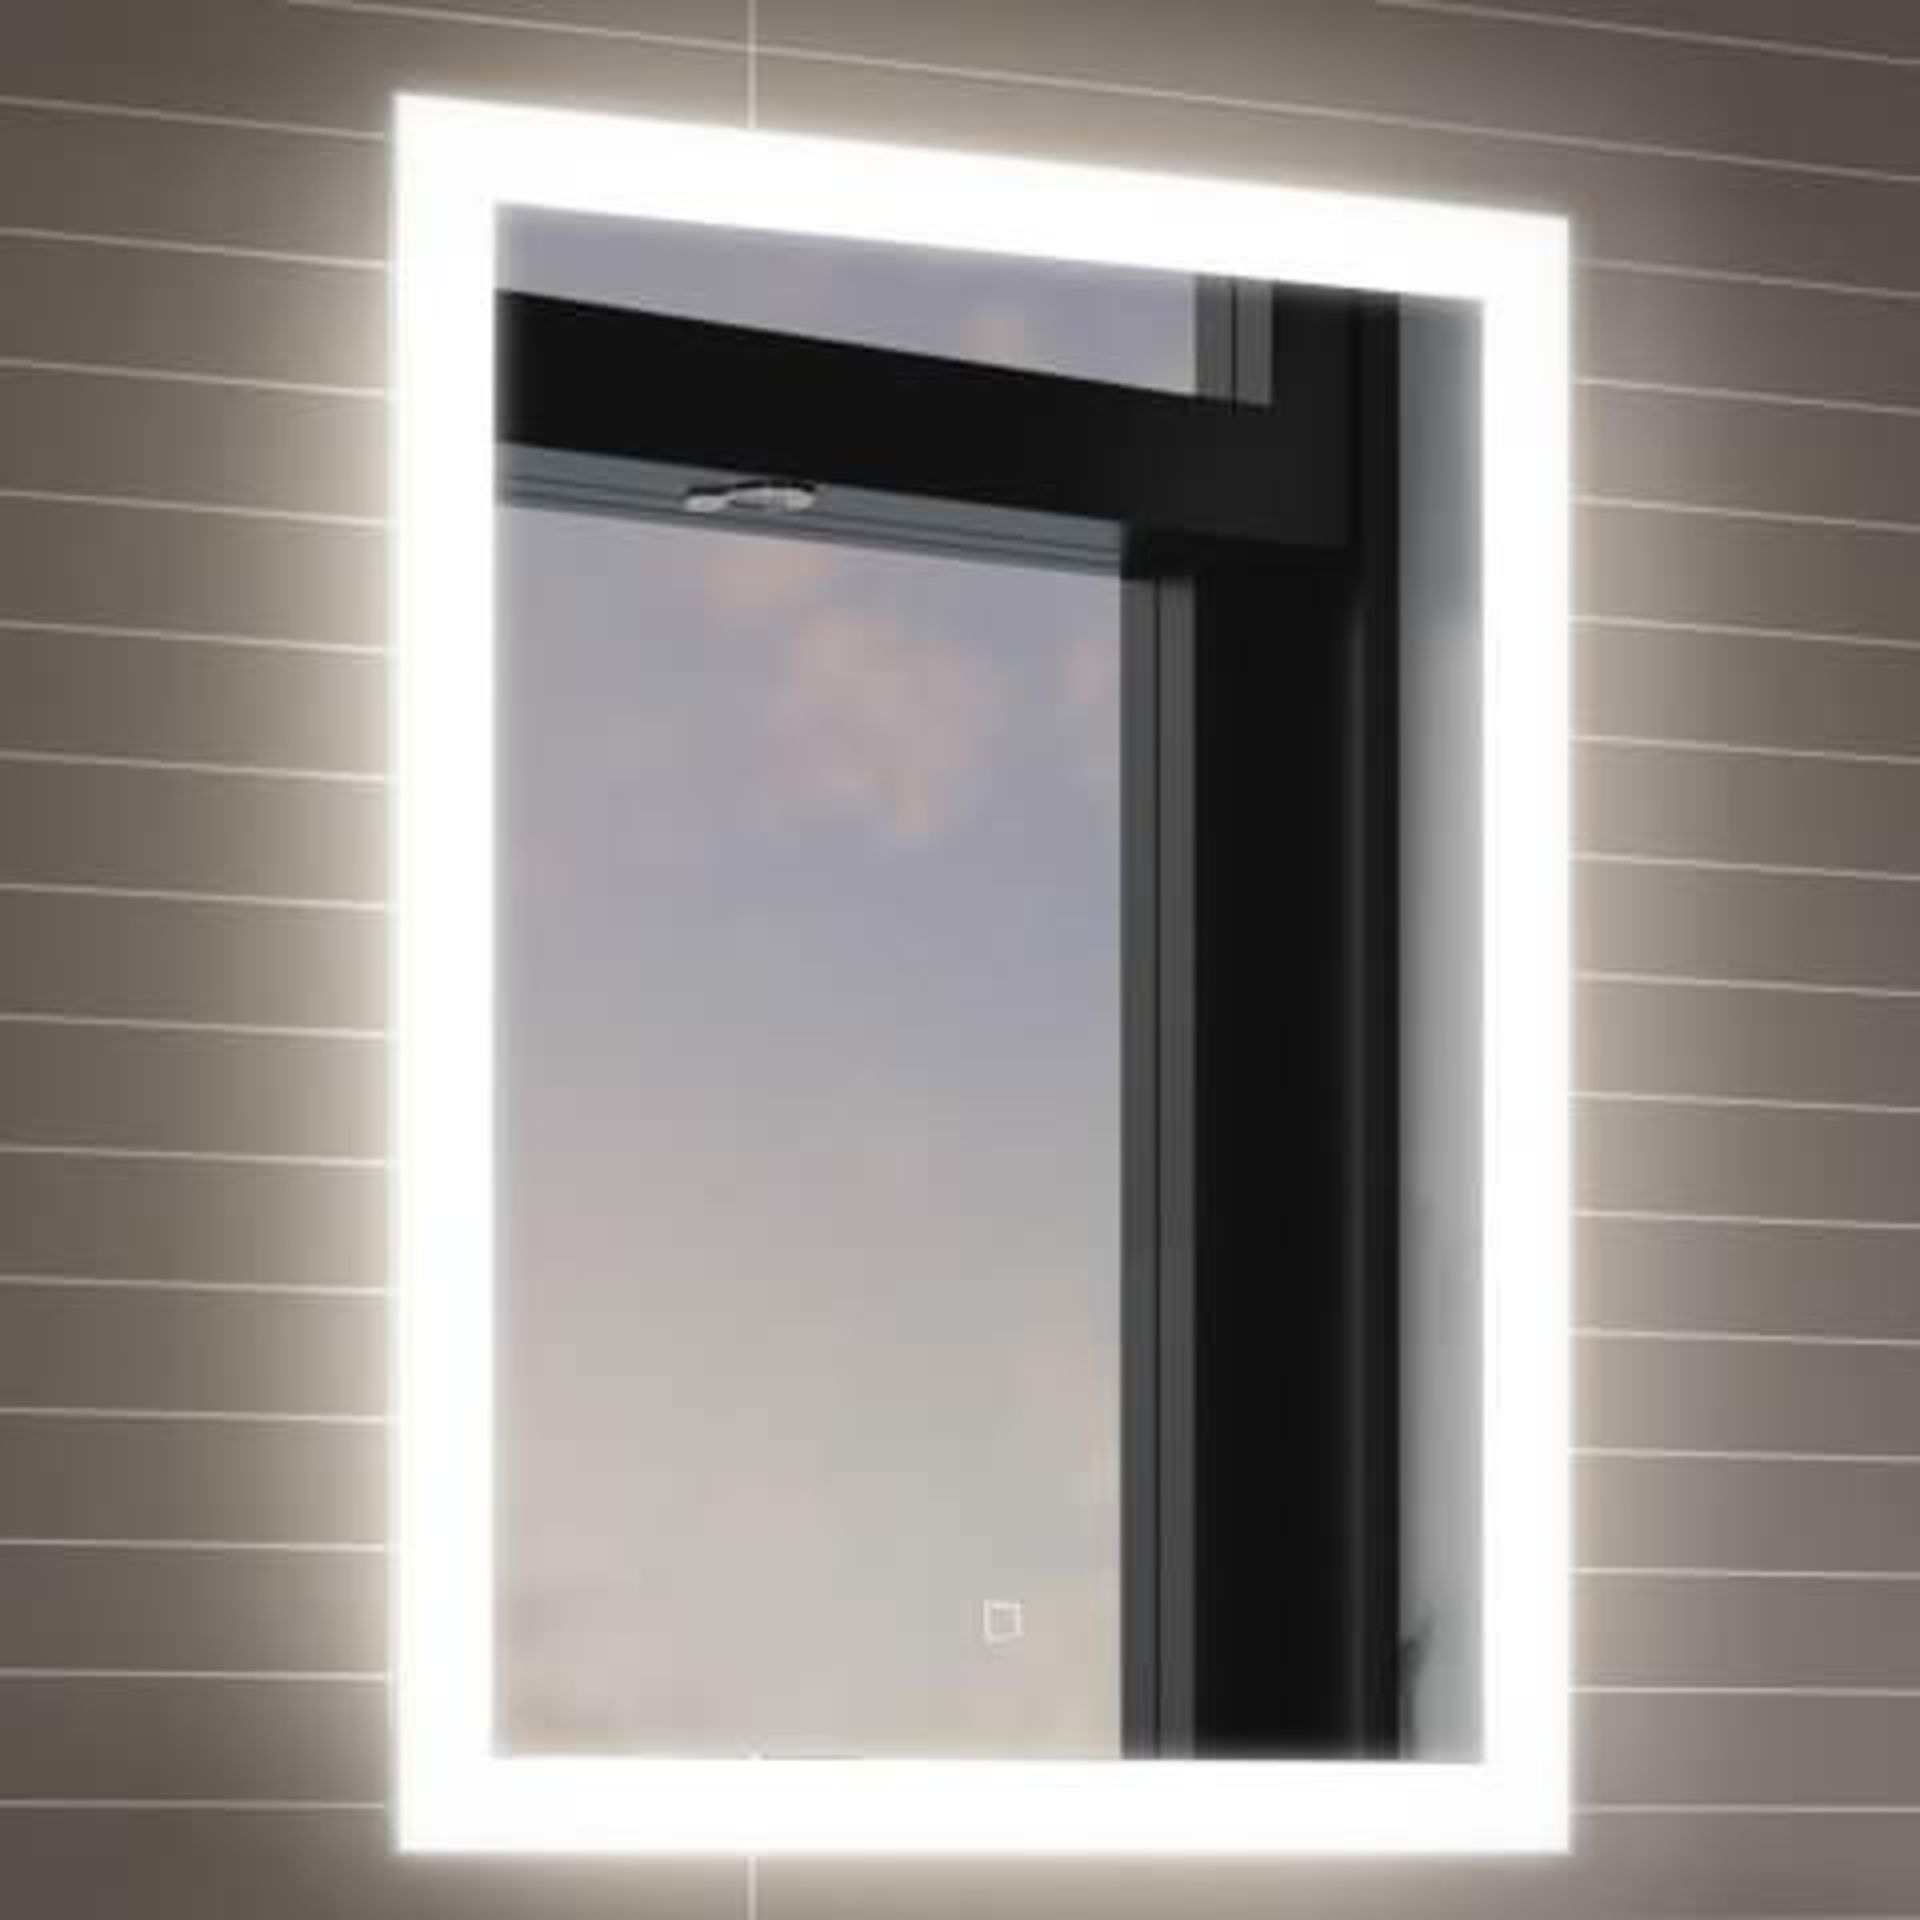 (A21) 700x500mm Orion Illuminated LED Mirror - Switch Control. RRP £349.99. Light up your bathroom